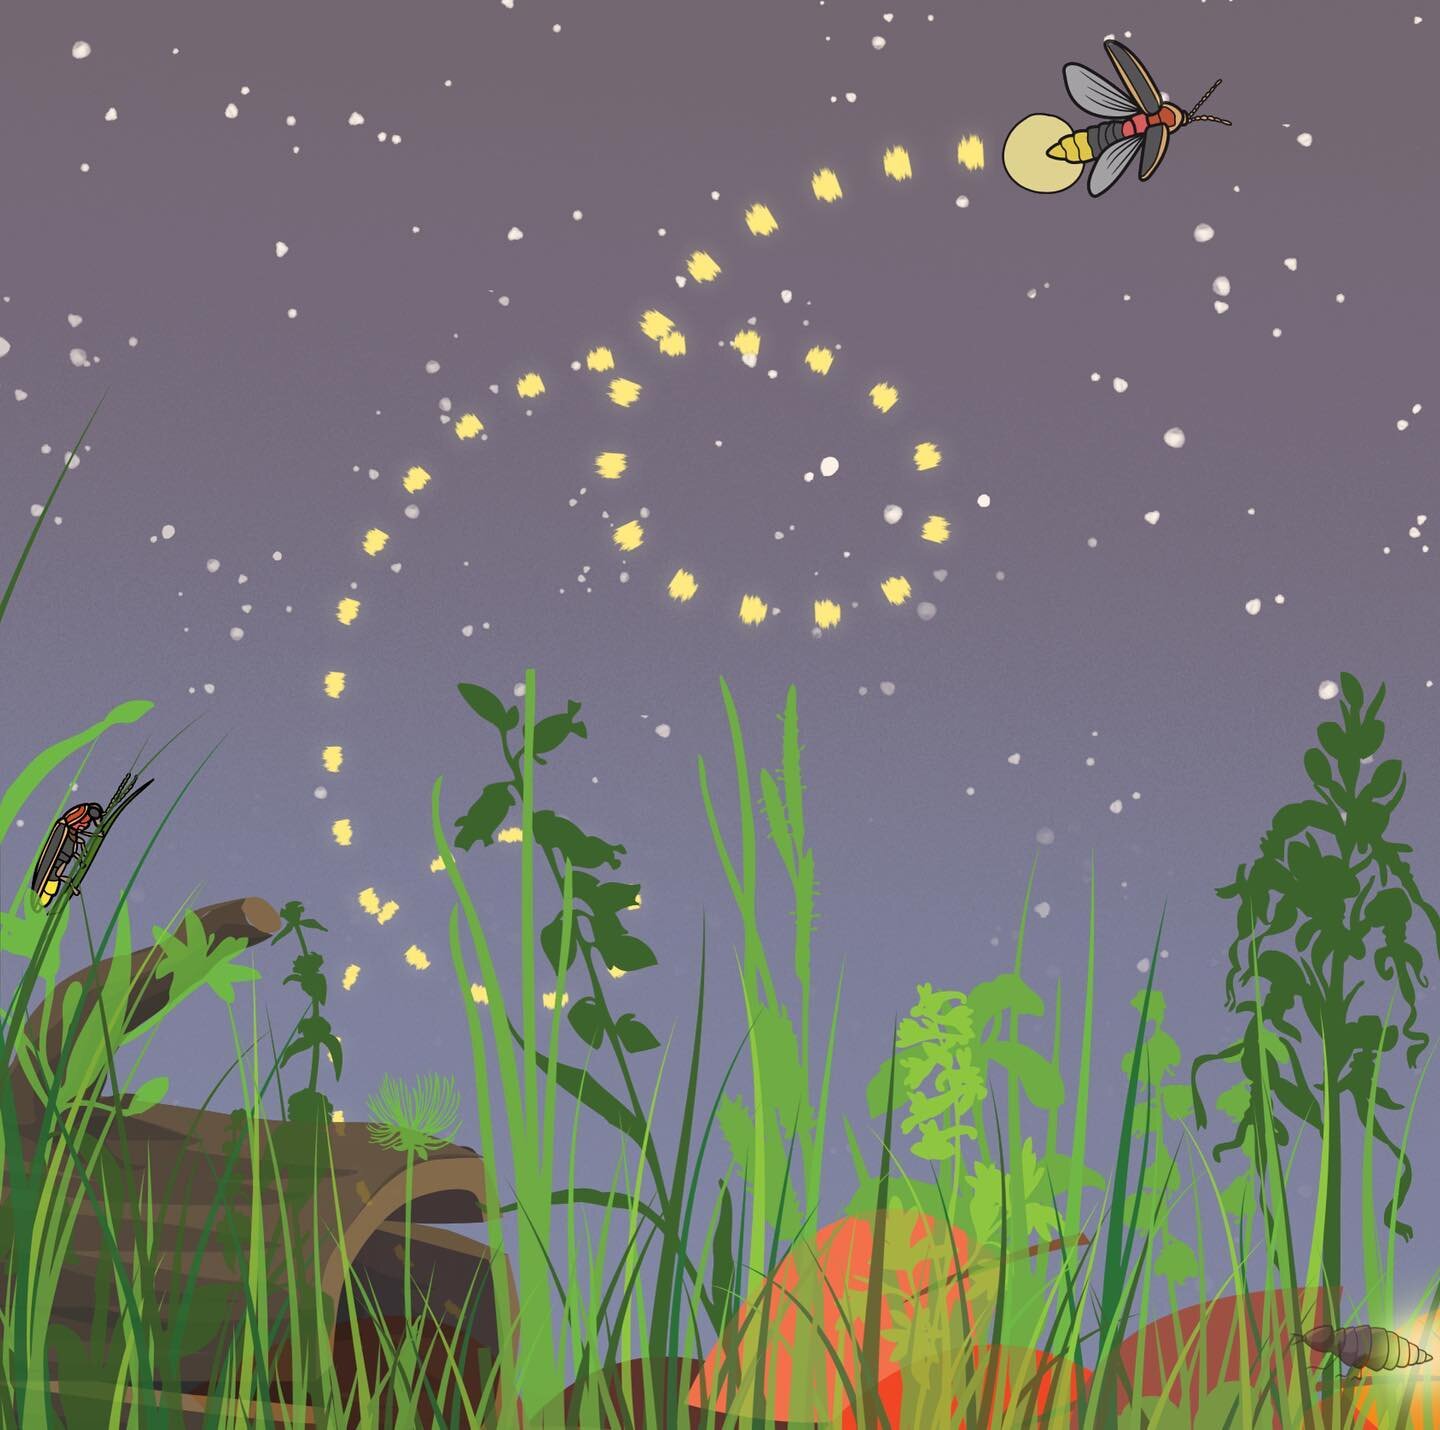 If you&rsquo;re local, consider joining me in person tomorrow (Wednesday, 6/28) for a talk about land stewardship on behalf of our beloved fireflies!  I&rsquo;ll touch on their life cycle, common species in our area, and ways to support them in your 